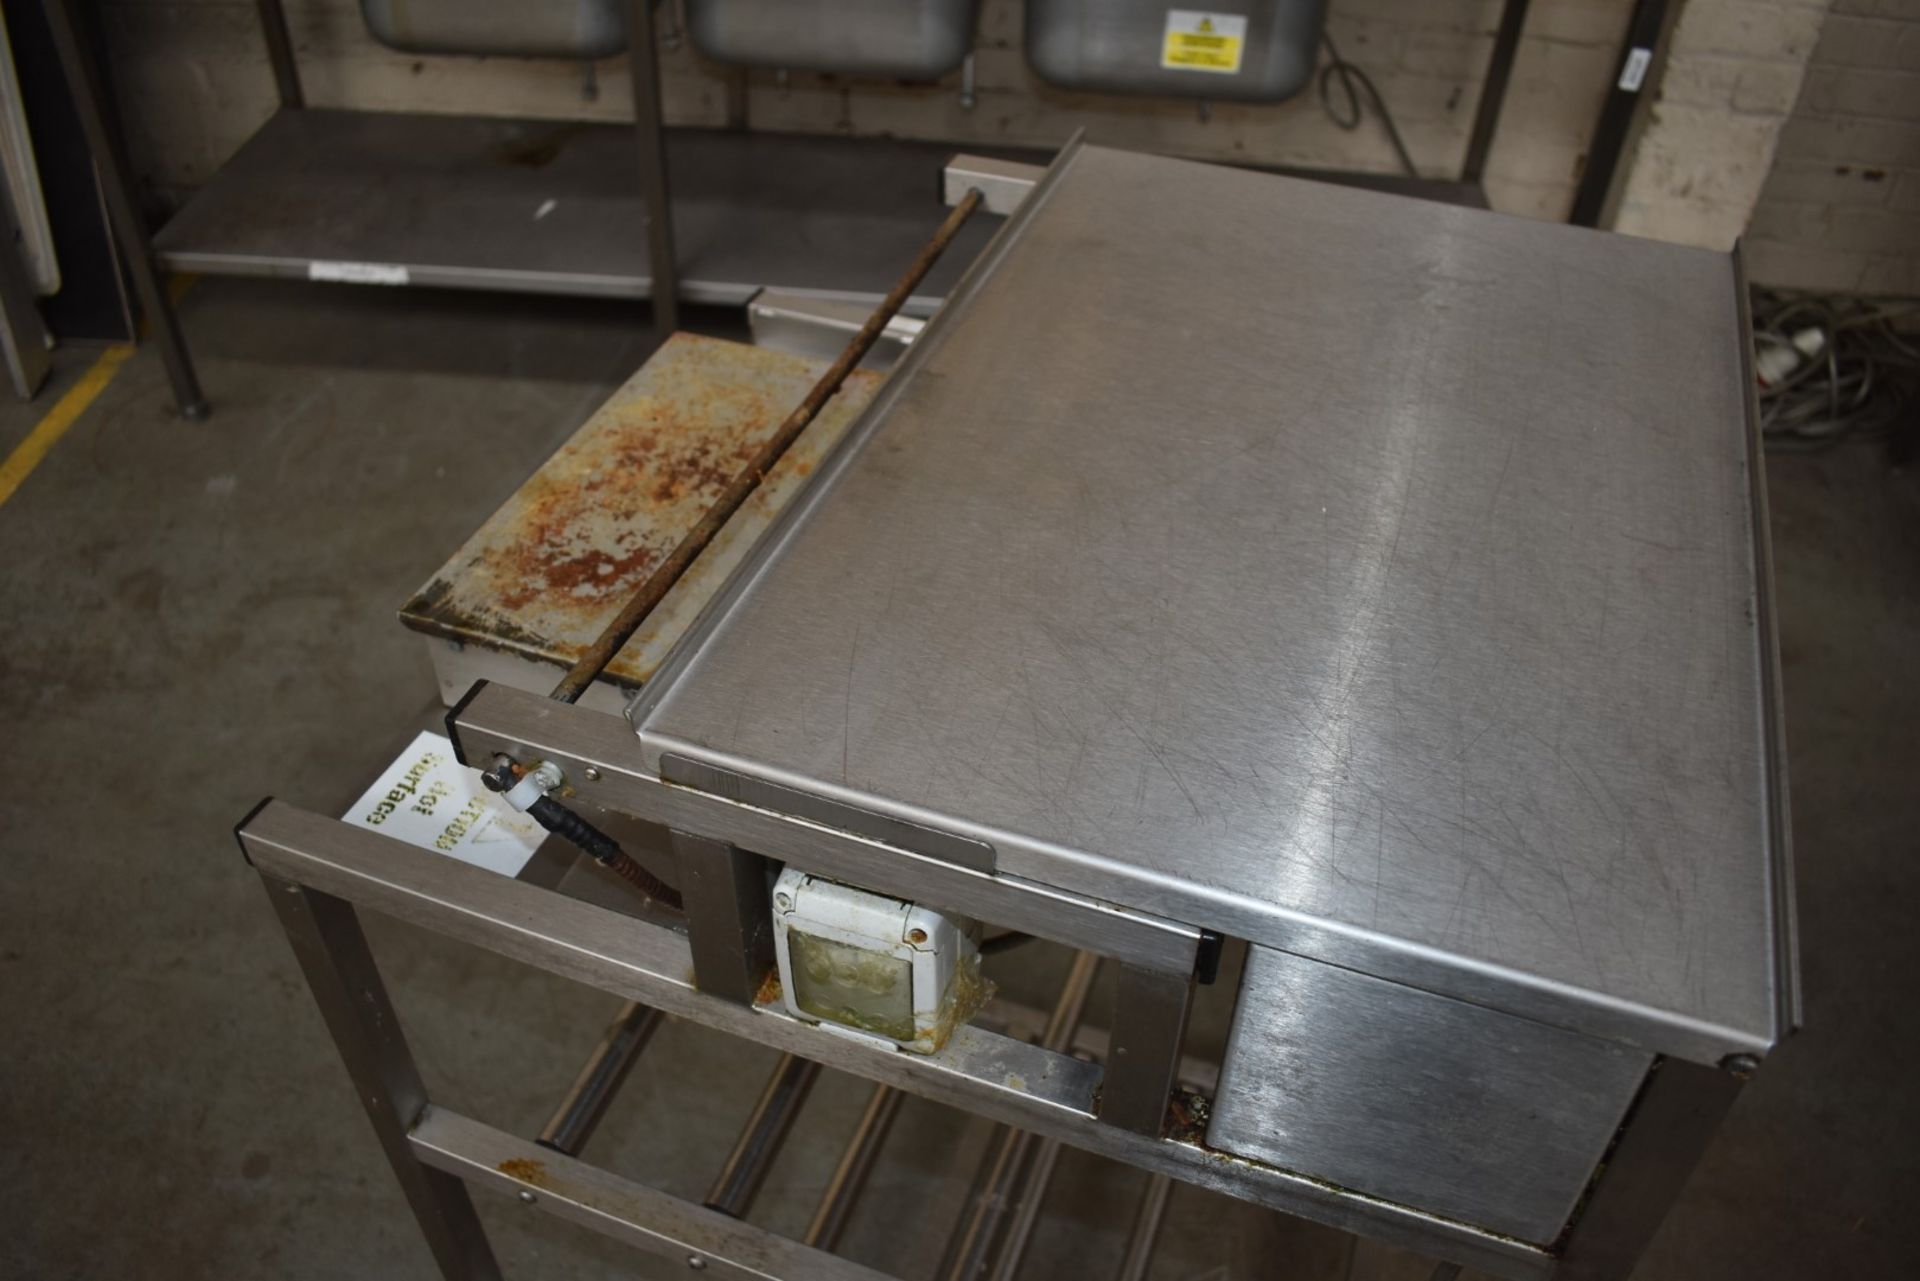 1 x Food Tray Wrapper Unit For Heat Sealed Wrapping - Dimensions: W56 cms - 240v - Ref: CAM112 WH4 - - Image 4 of 5